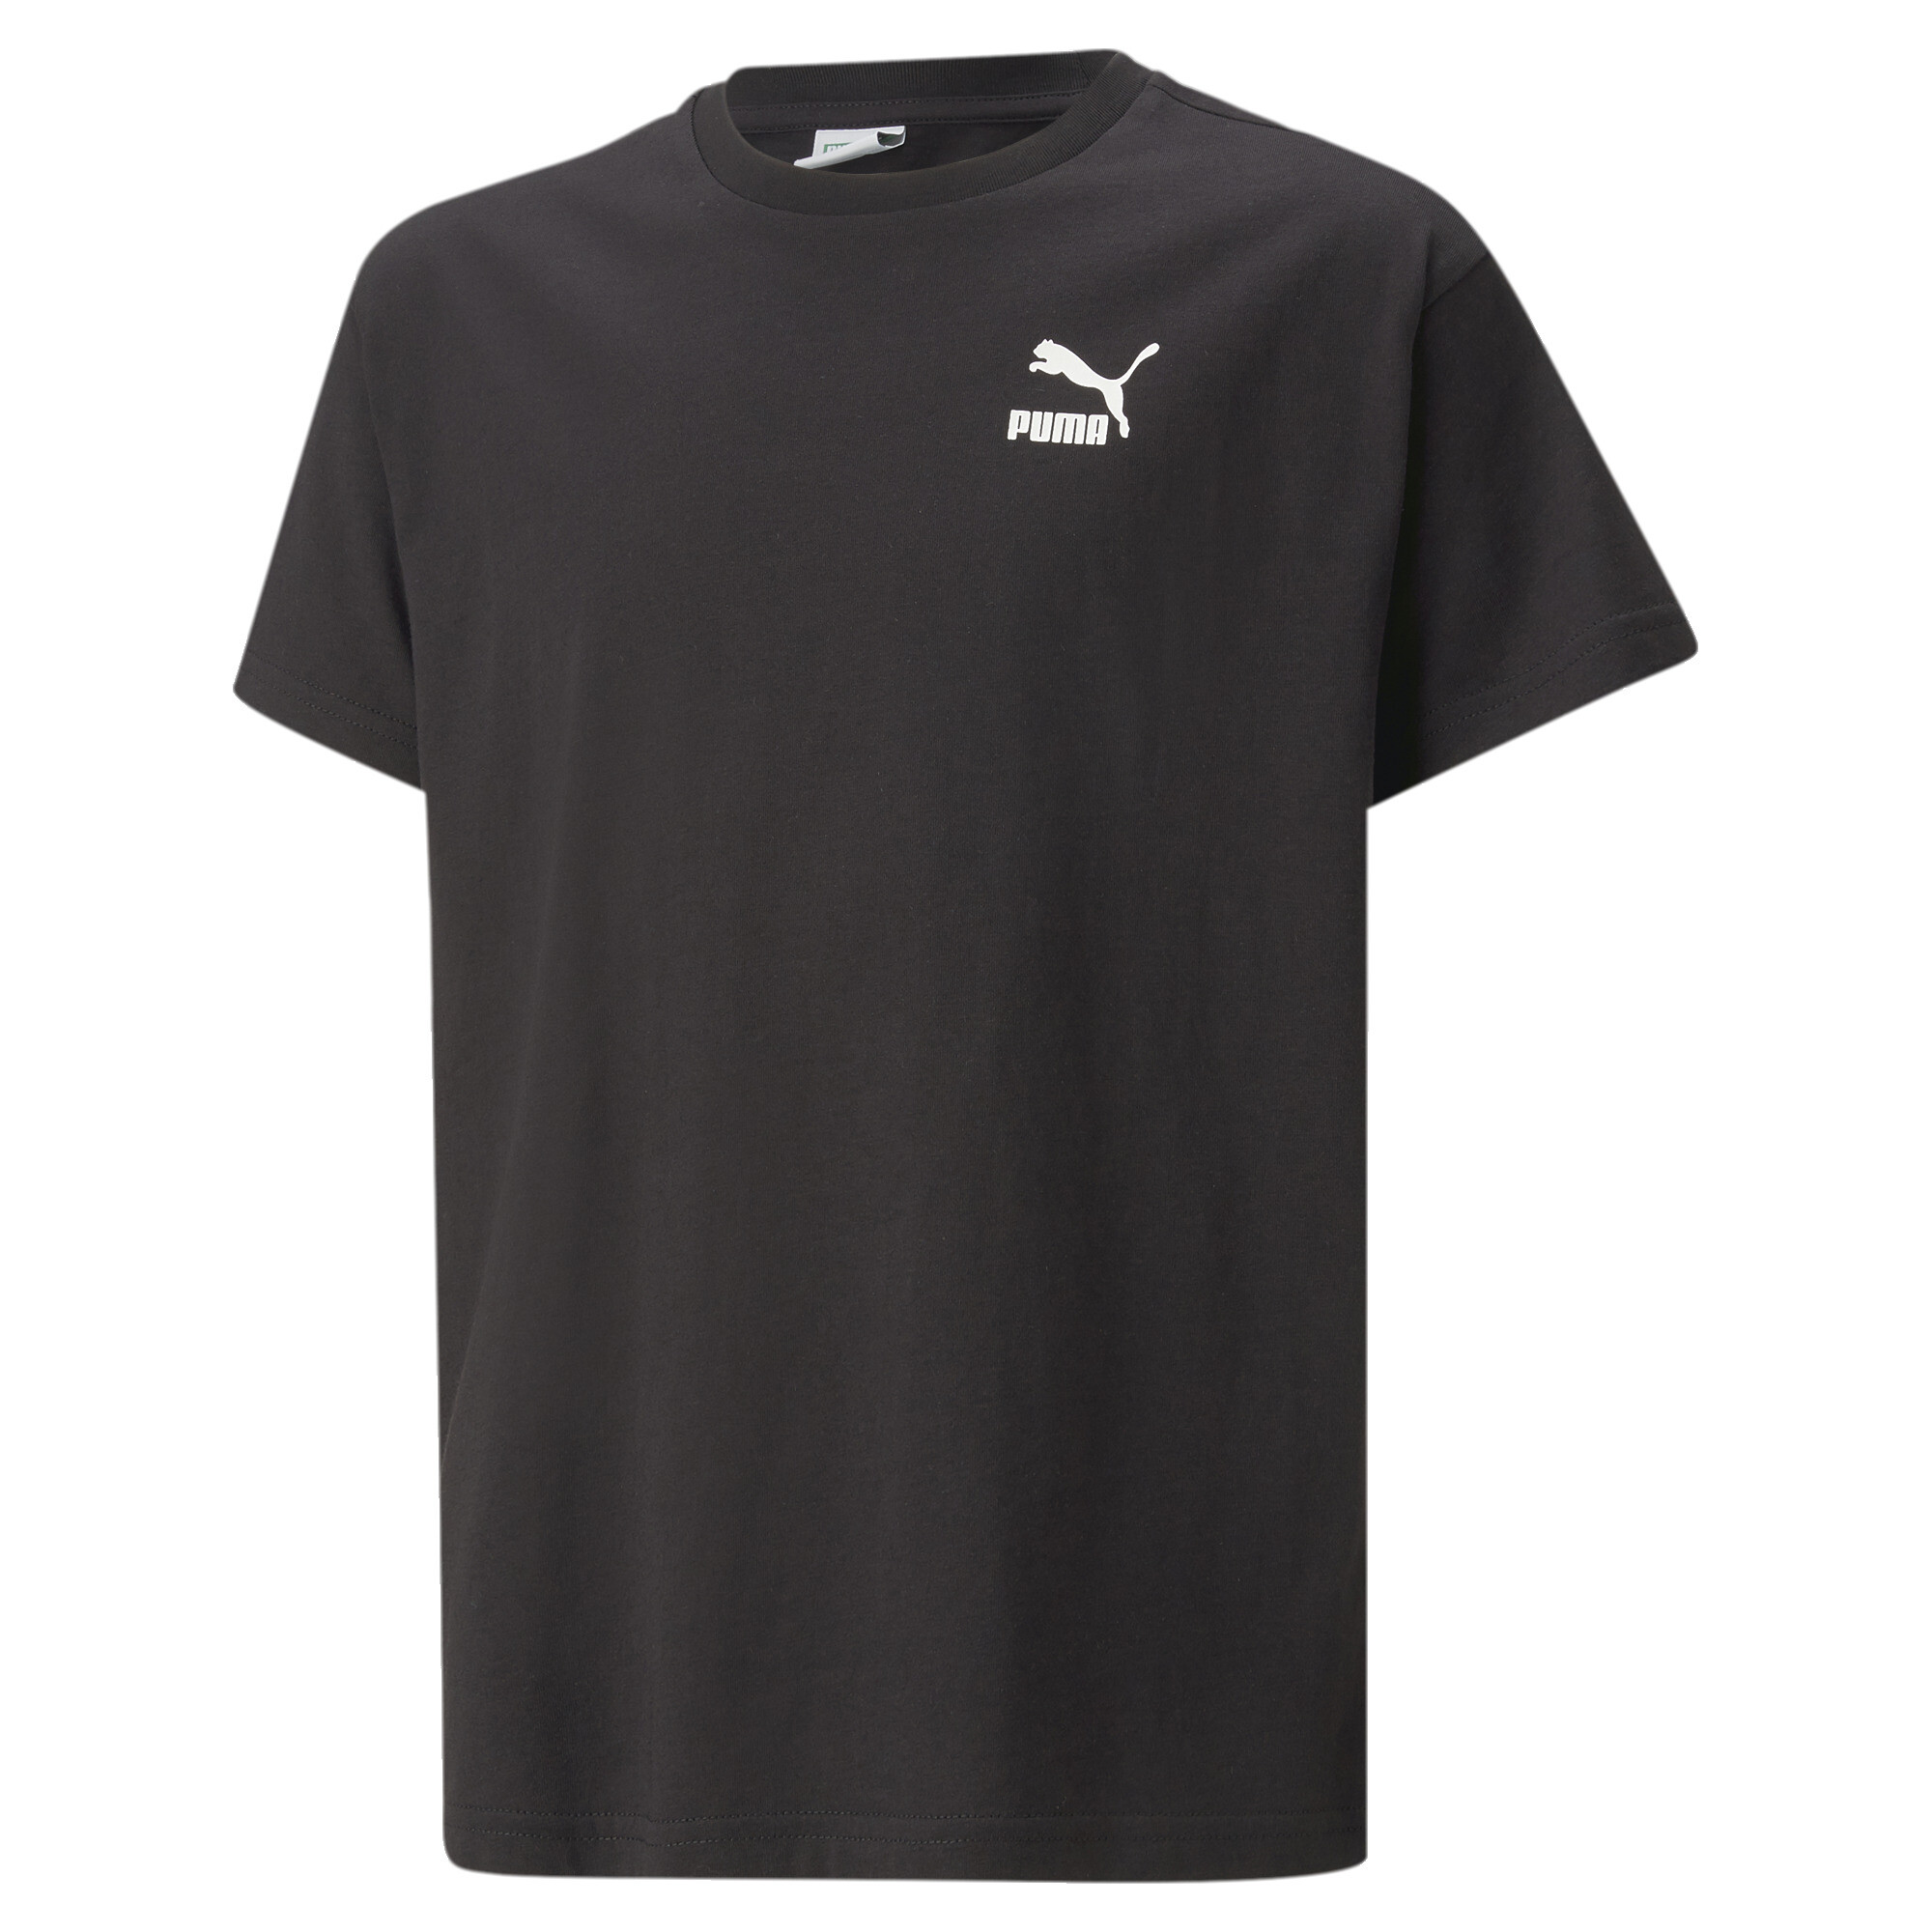 Puma Classics Relaxed Tee Youth, Black, Size 3-4Y, Age